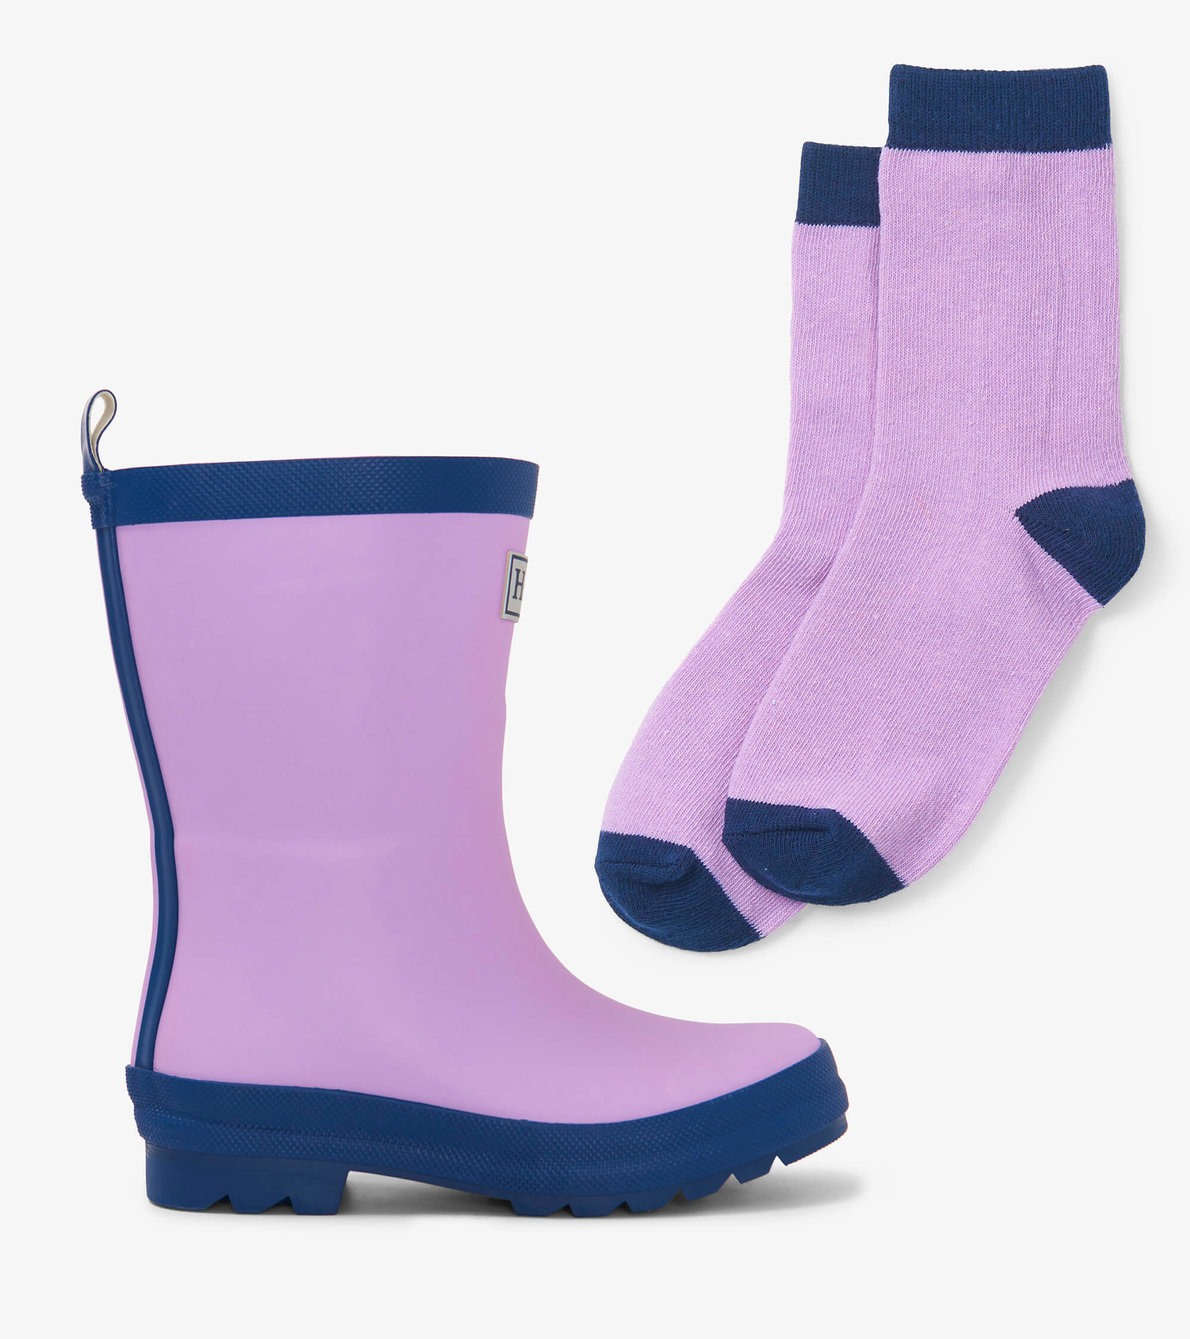 View larger image of Lilac And Navy Matte Kids Rain Boots